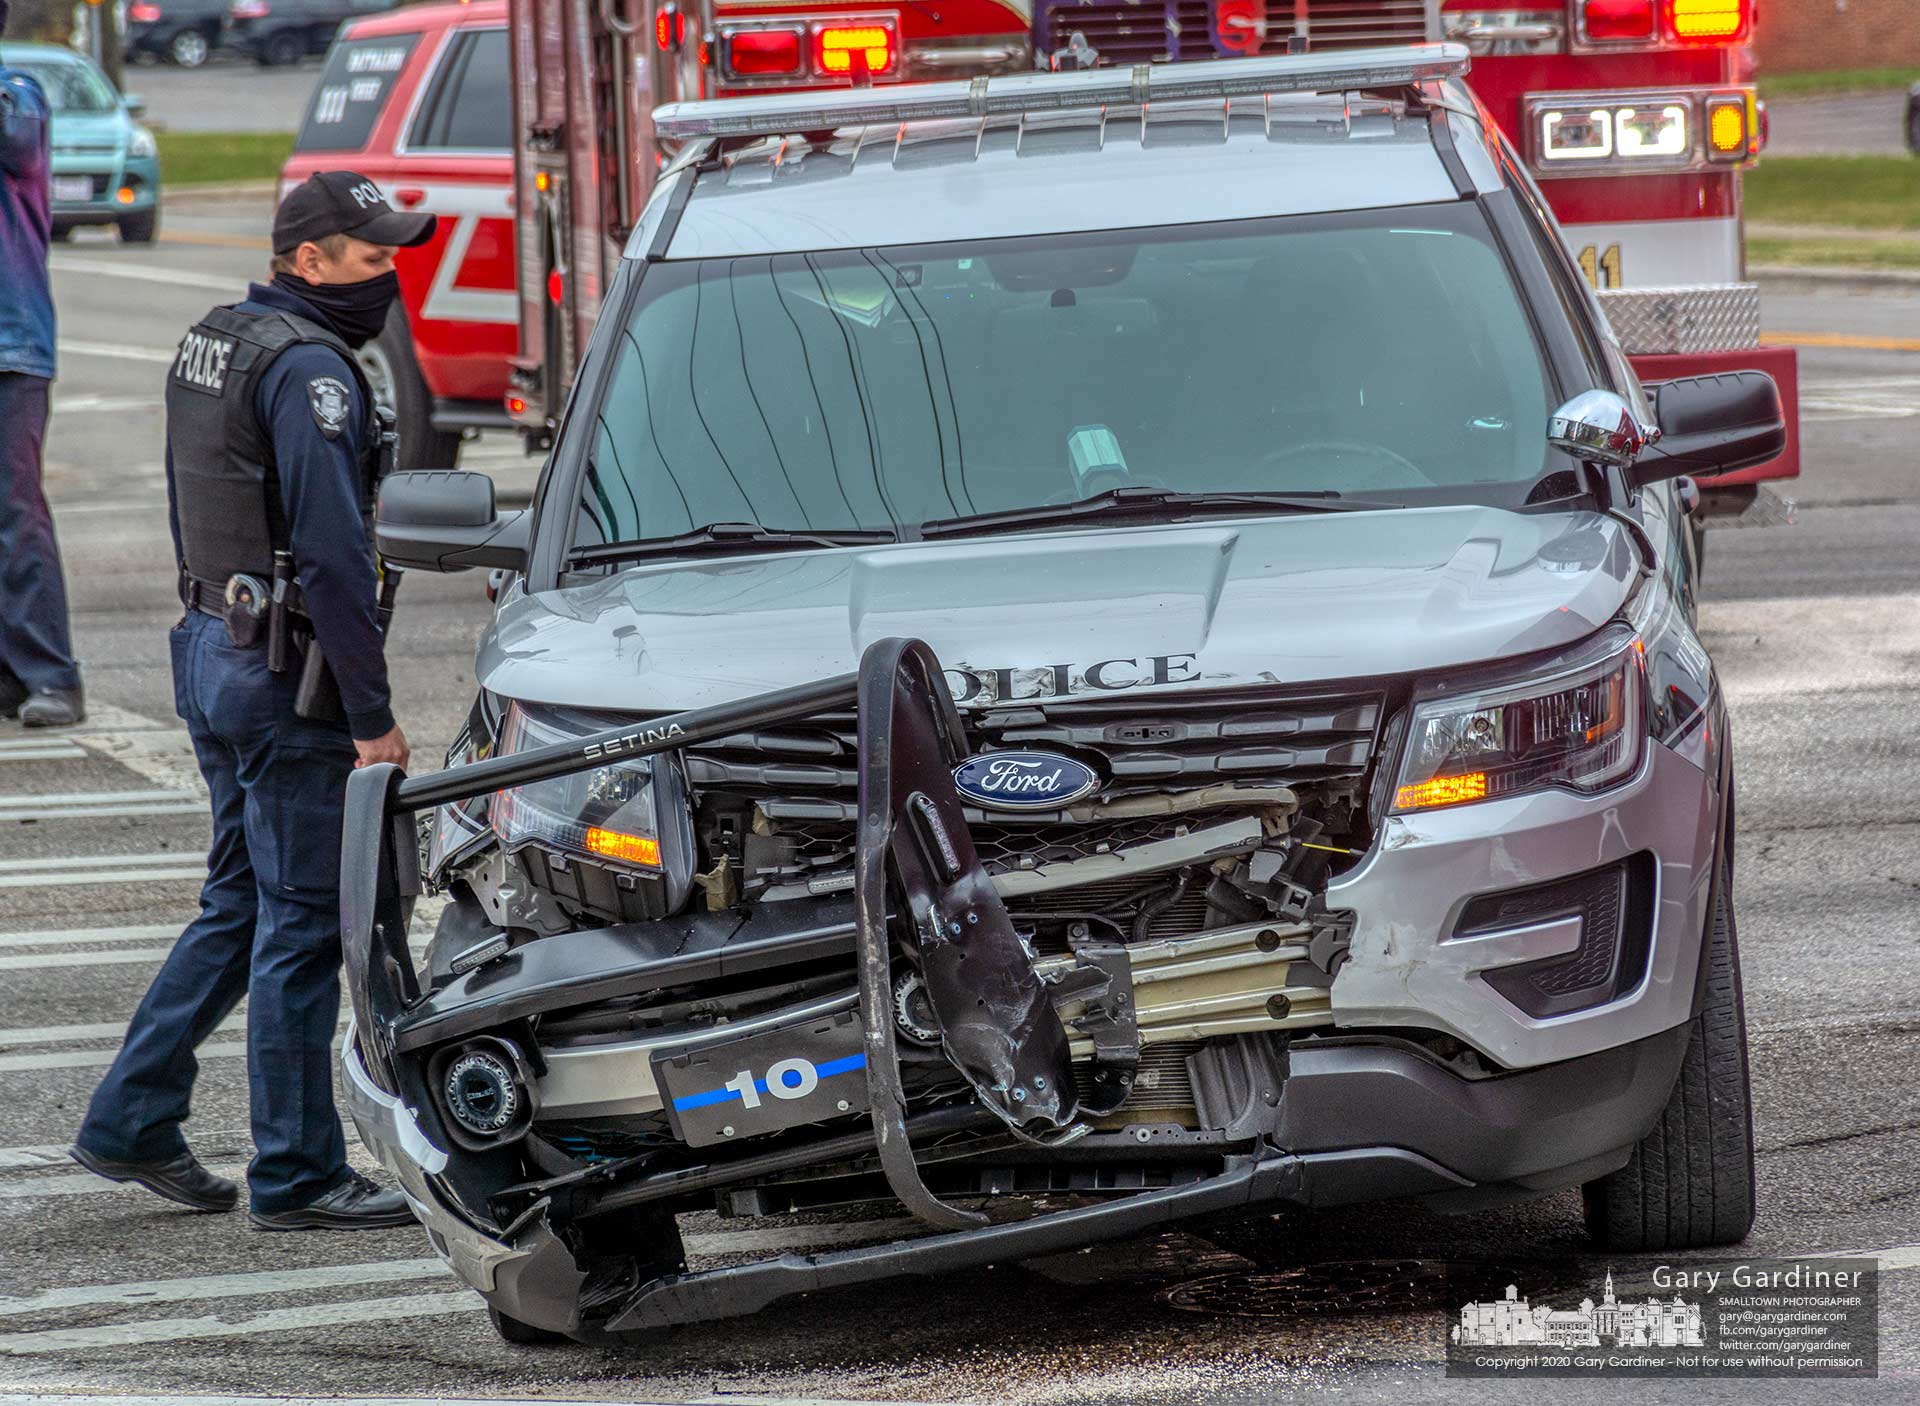 A Westerville Police officer looks over a cruiser damaged in a crash Monday afternoon at West Main and Cleveland Ave. My Final Photo for Dec. 7, 2020.